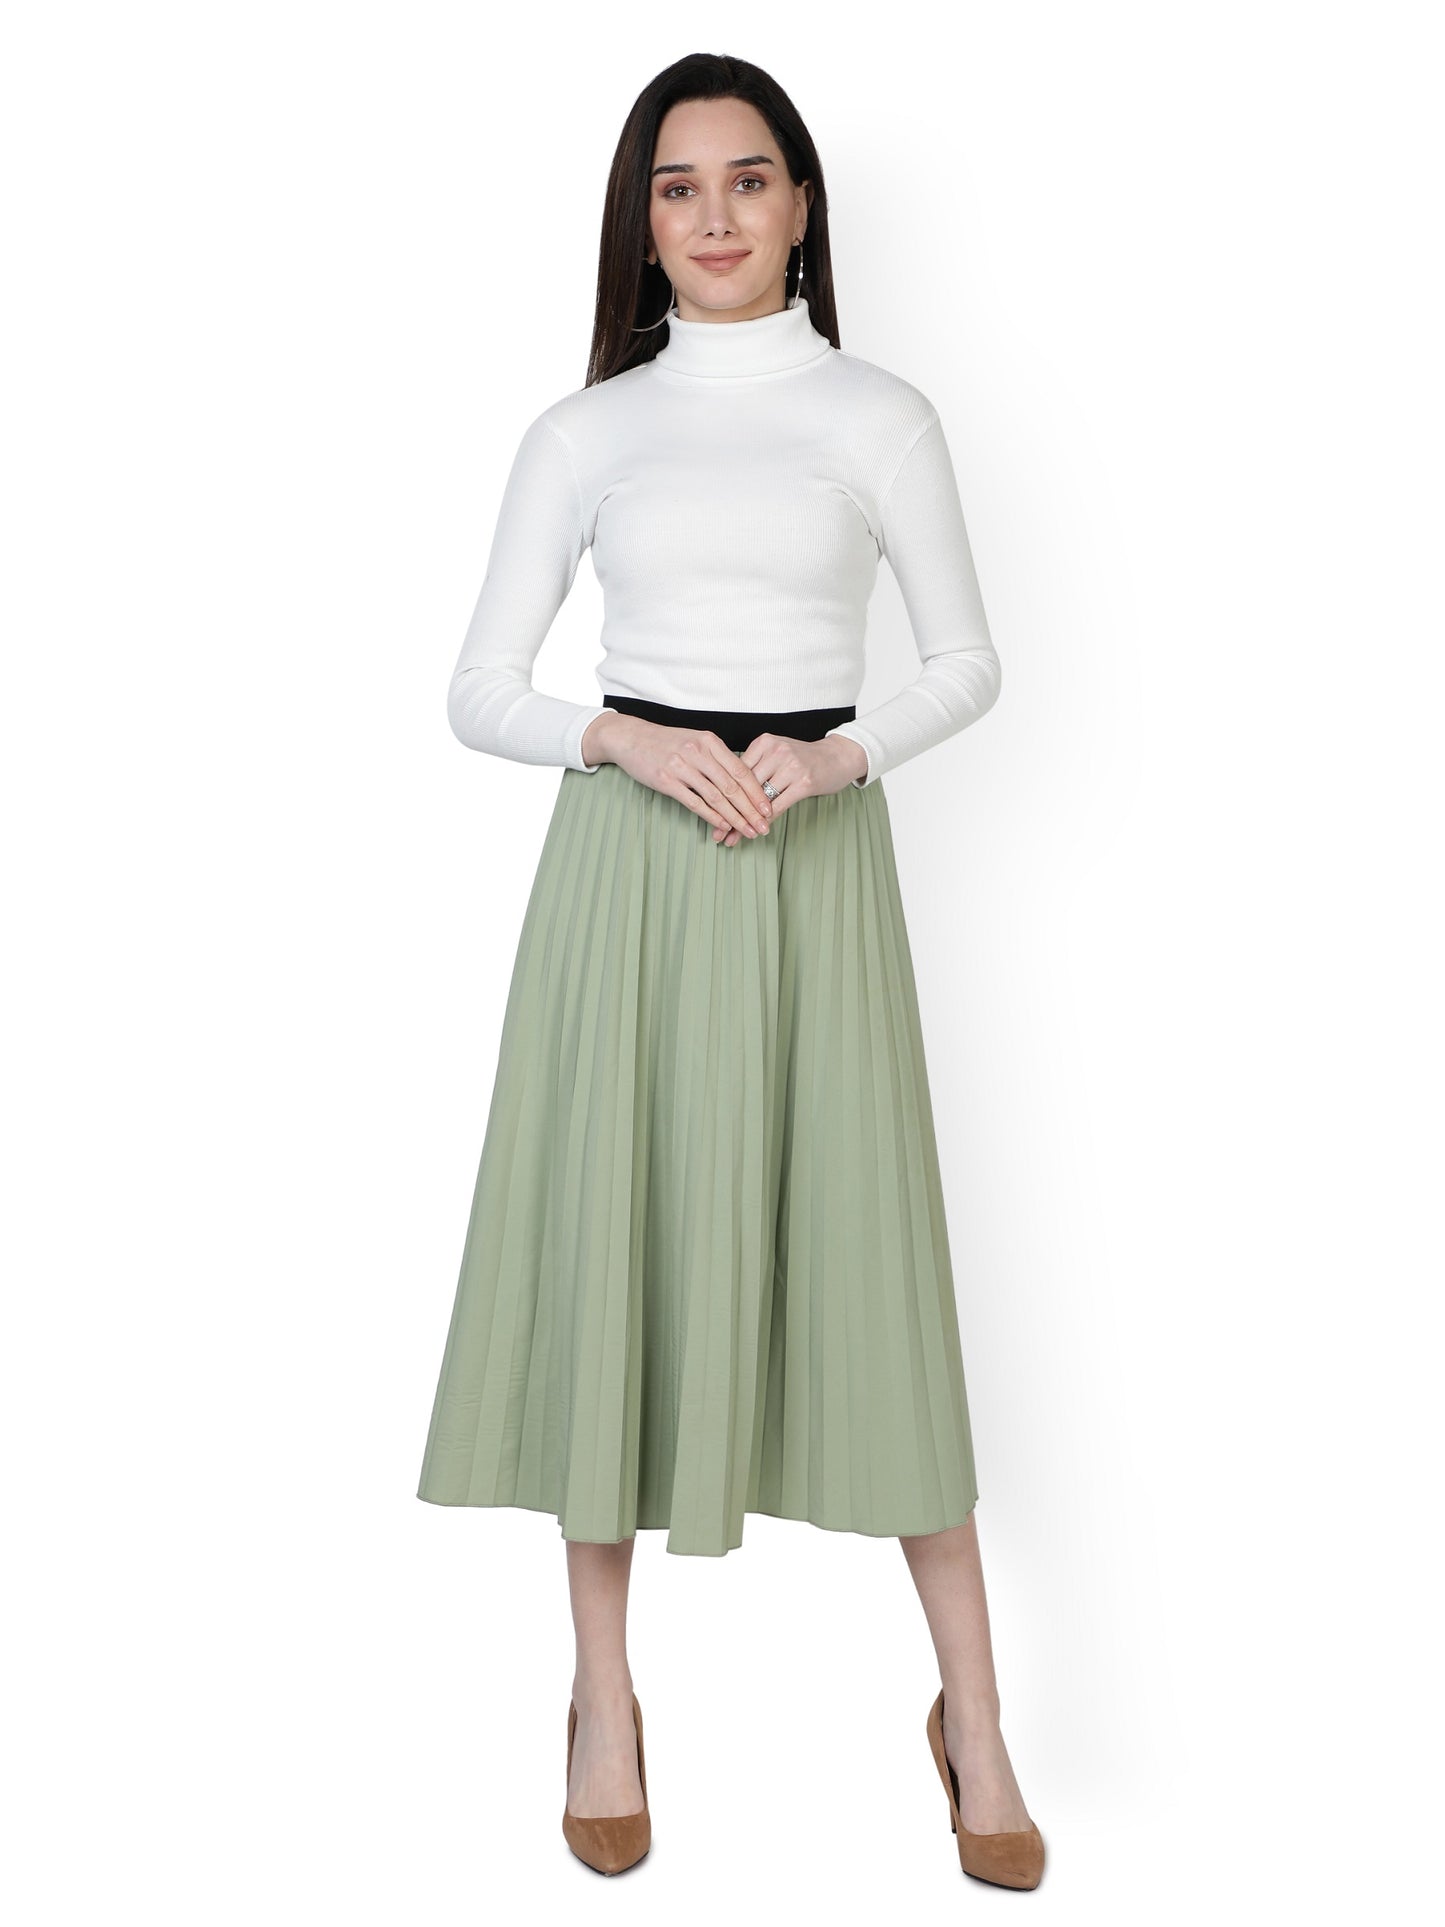 NUEVOSDAMAS Women Western Poly Lycra Solid Skirt | Latest Stylish A- Line Skirt for Summer | Party Casual Knee Length Skirt_ Green